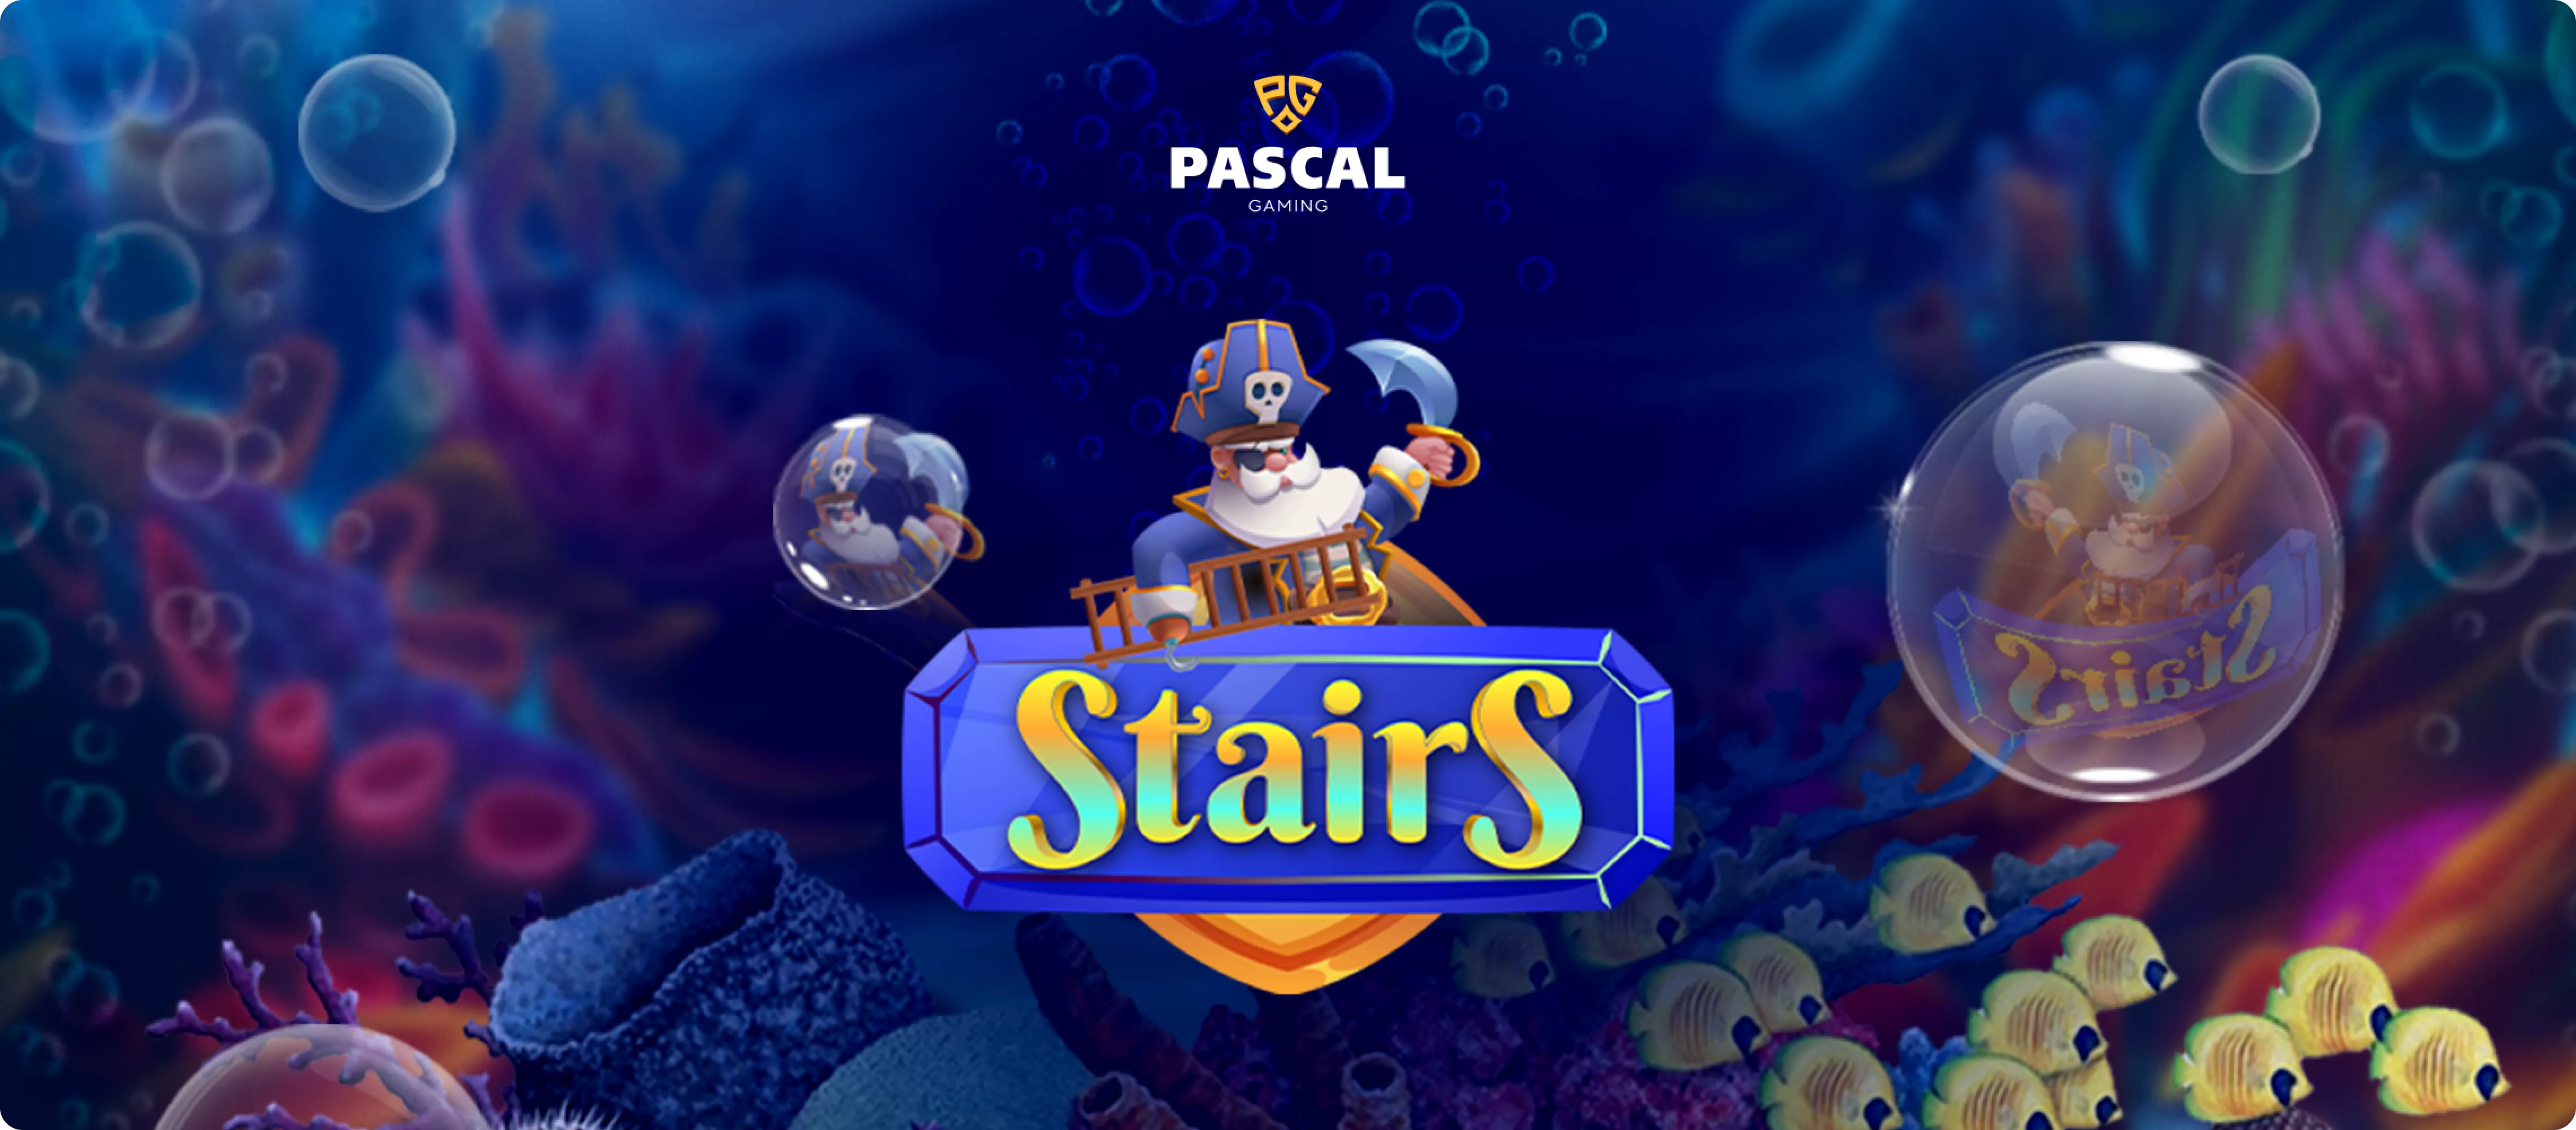 On The Way Up! Pascal Gaming Presents Stairs